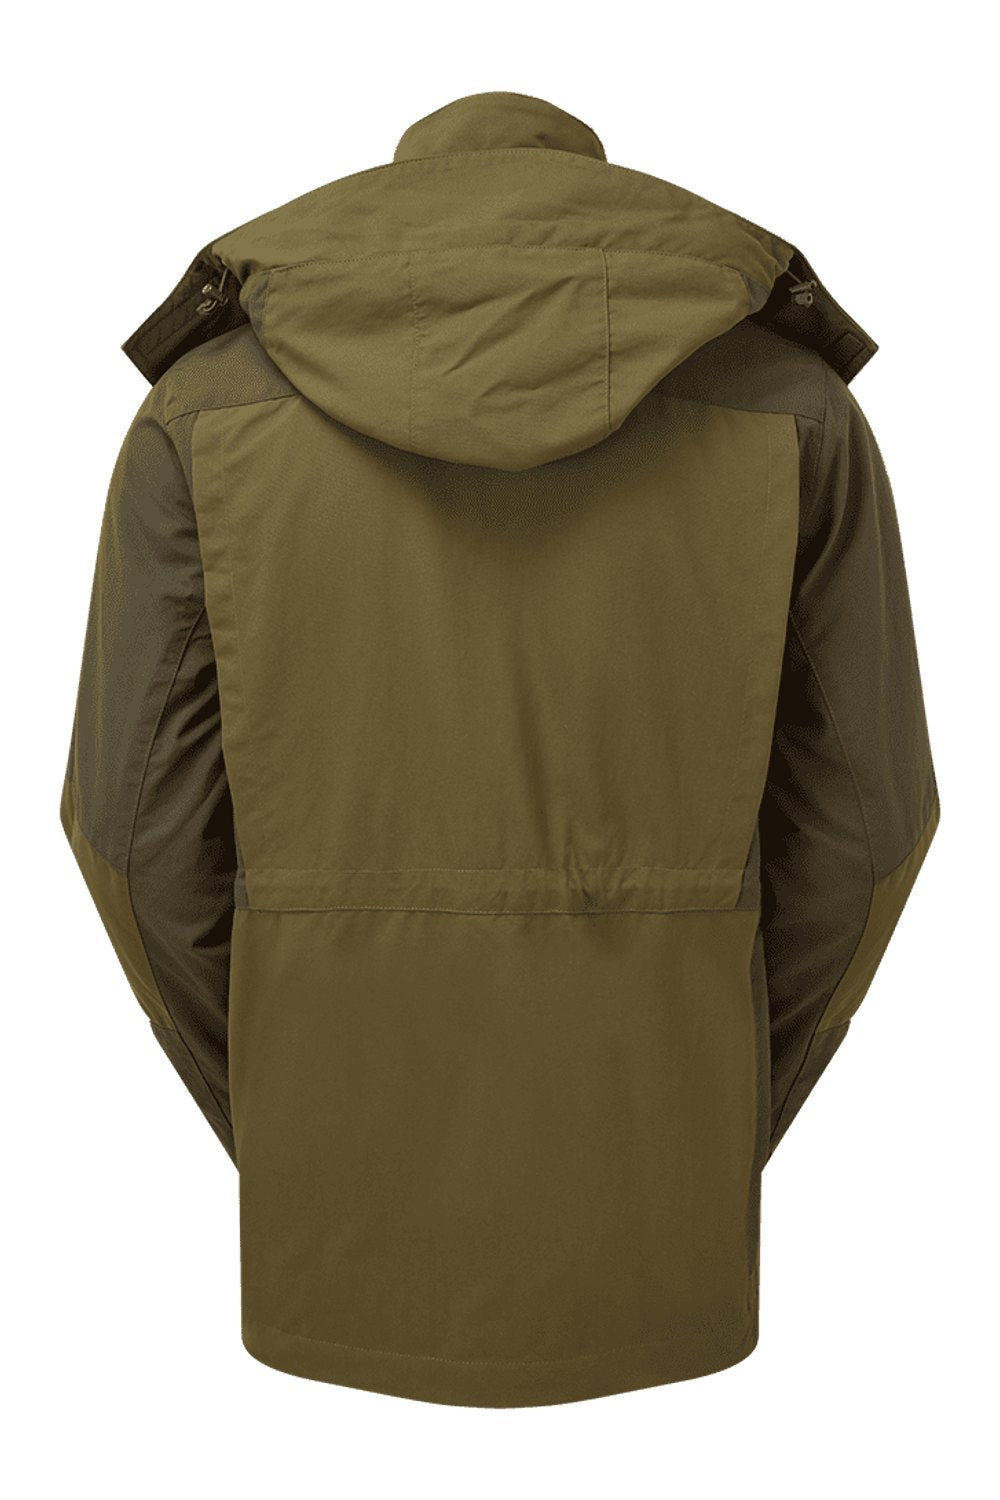 Shooterking Greenland Jacket 2.0 In Olive